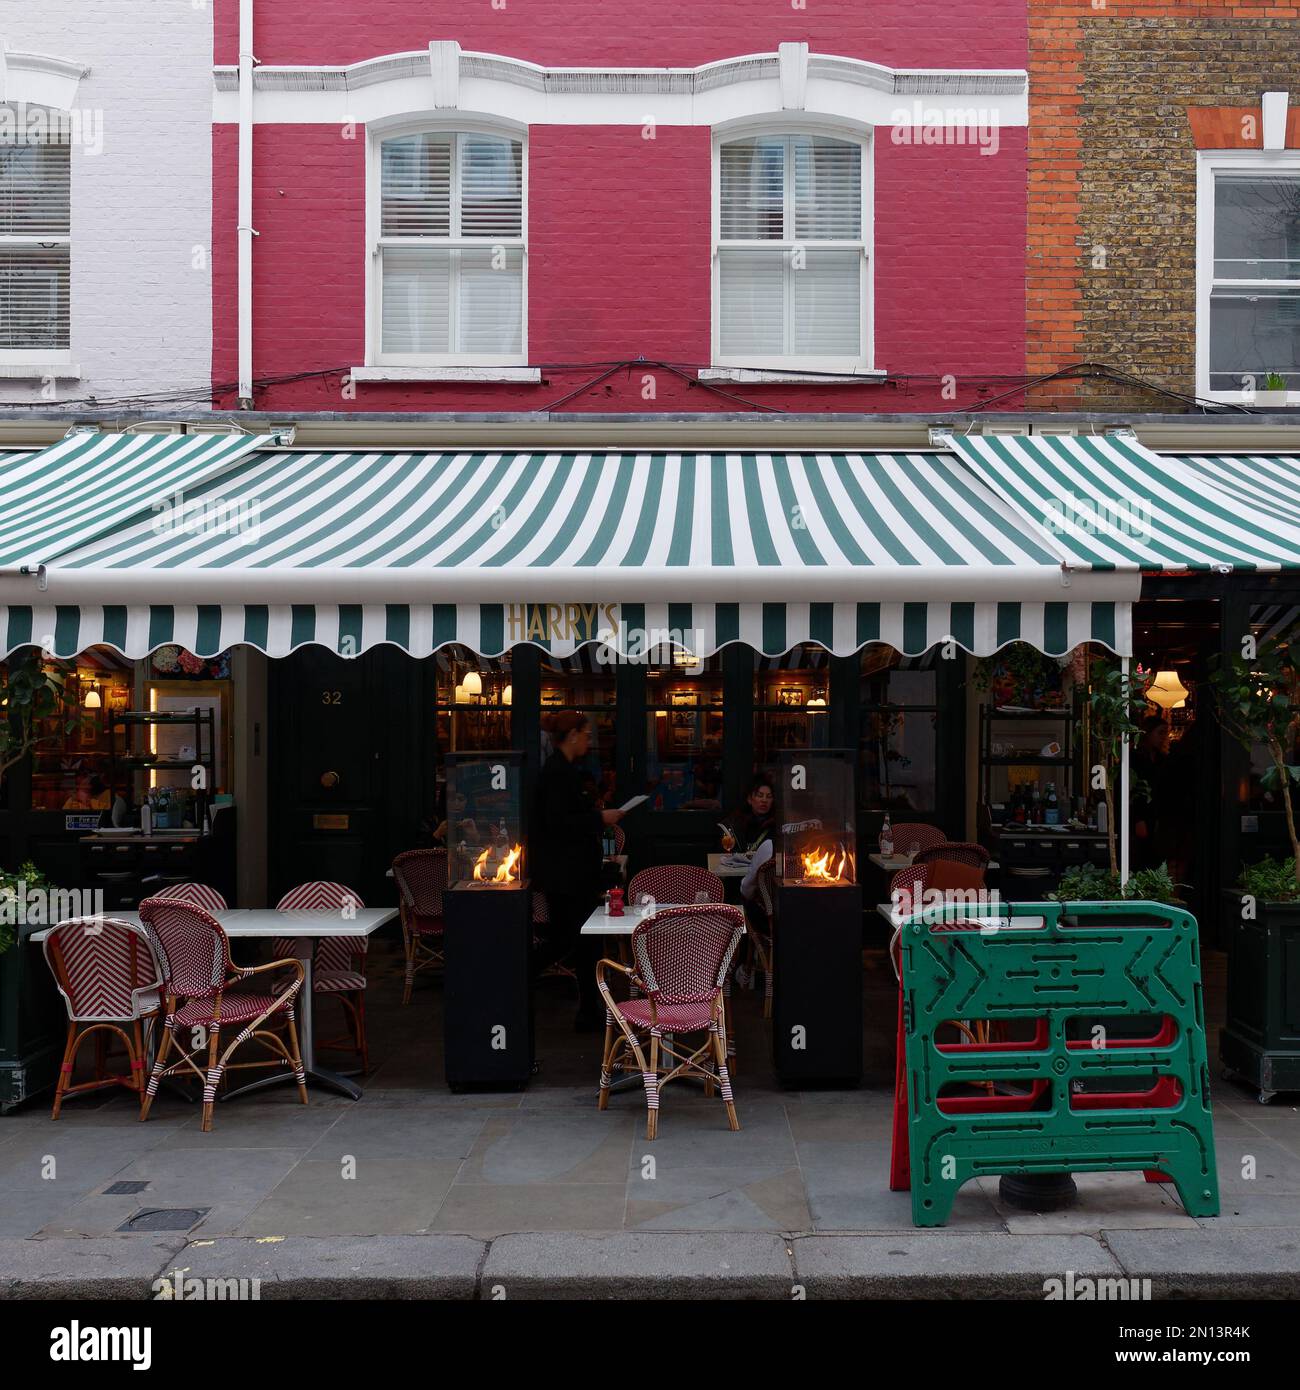 Cafe / restaurant with green and white awning and a red facade. London England. External heaters used on a winters day Stock Photo